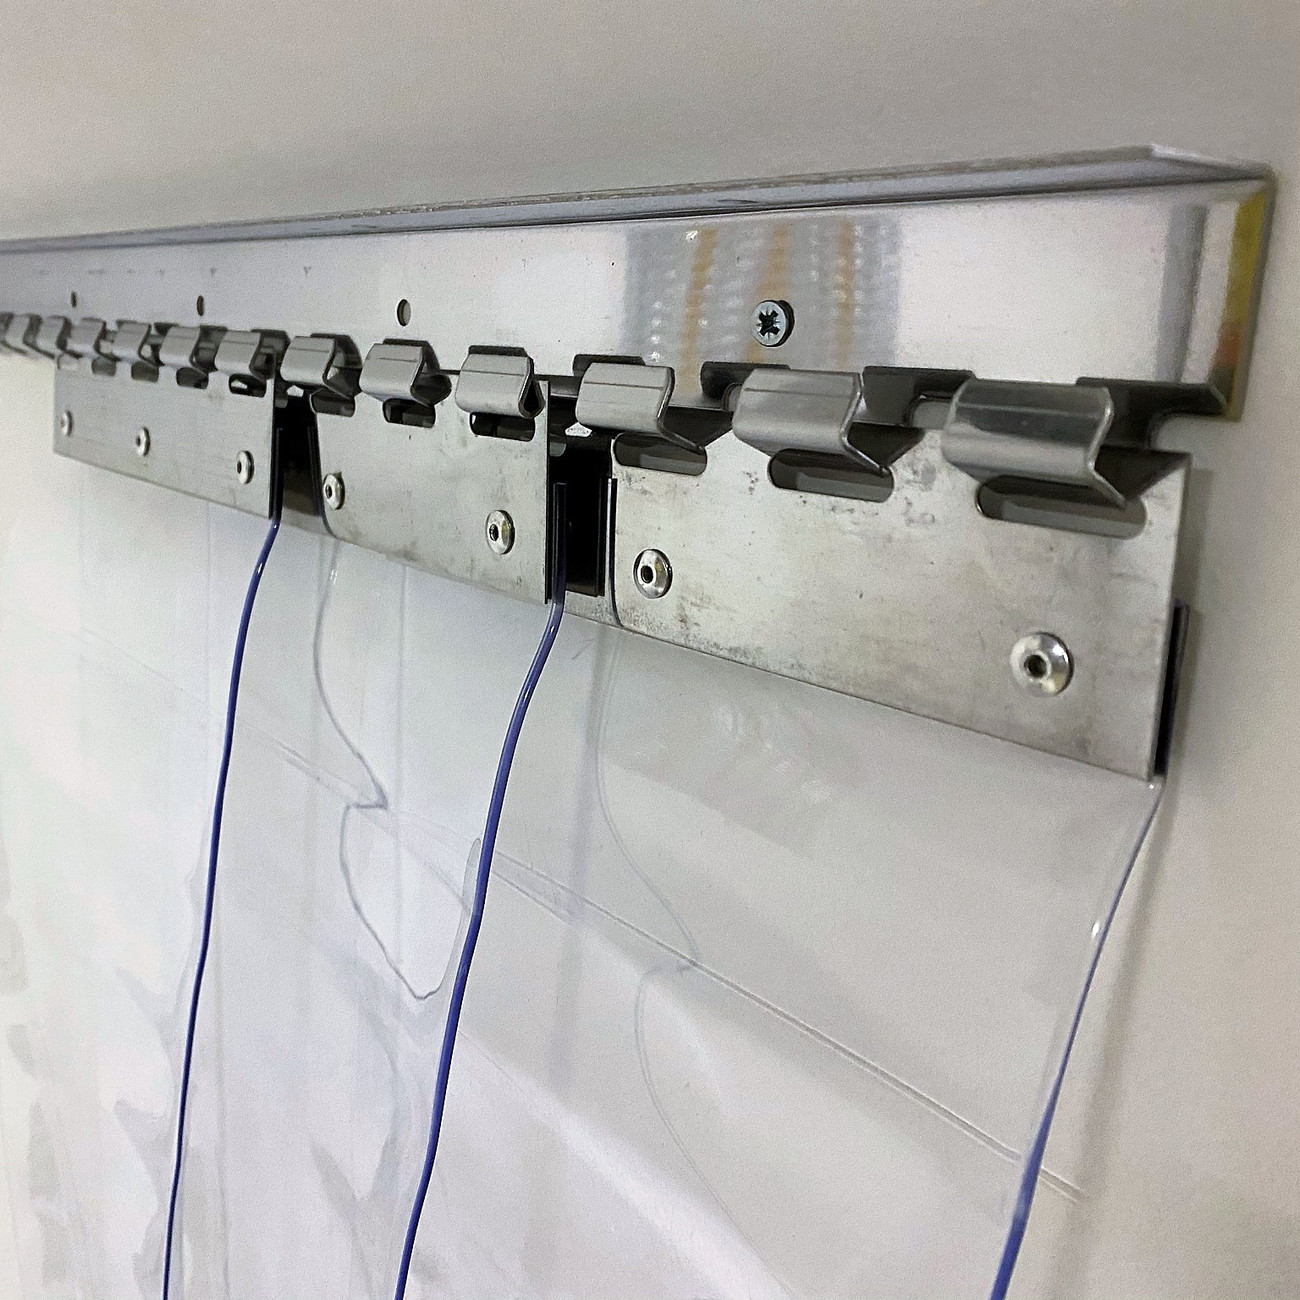 PVC Strip -From Hanging Rail. This product is made to measure and can be  cut to any length needed.